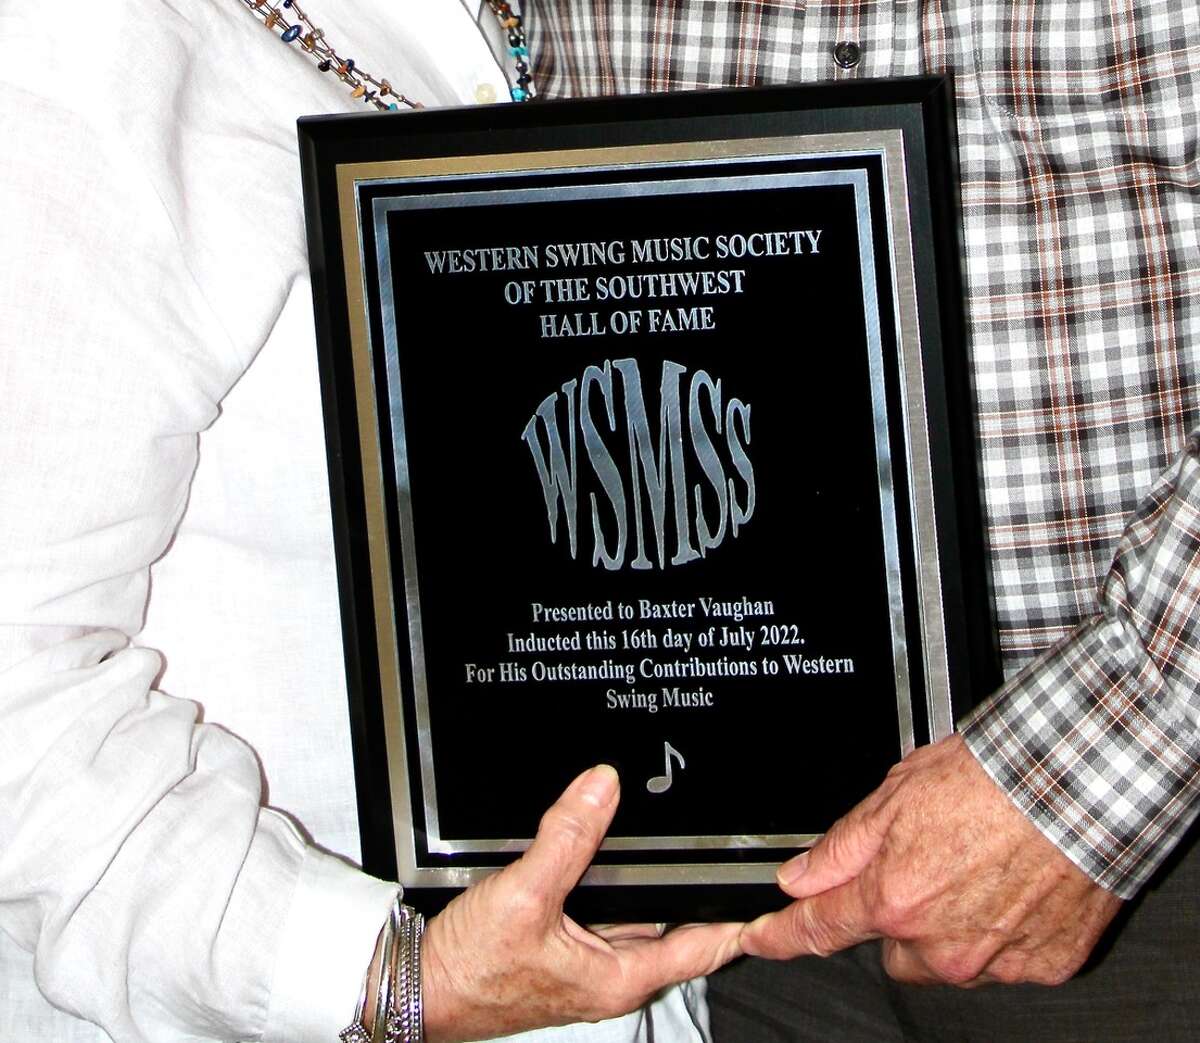 Local musician Baxter Vaughan was recently inducted into the Western Swing Music Society of the Southwest Hall of Fame. A group of his friends and supporters arranged for him to receive his plaque and public recognition during a celebration in Plainview during the Plainview Dance Club’s weekly shindig on July 28. 